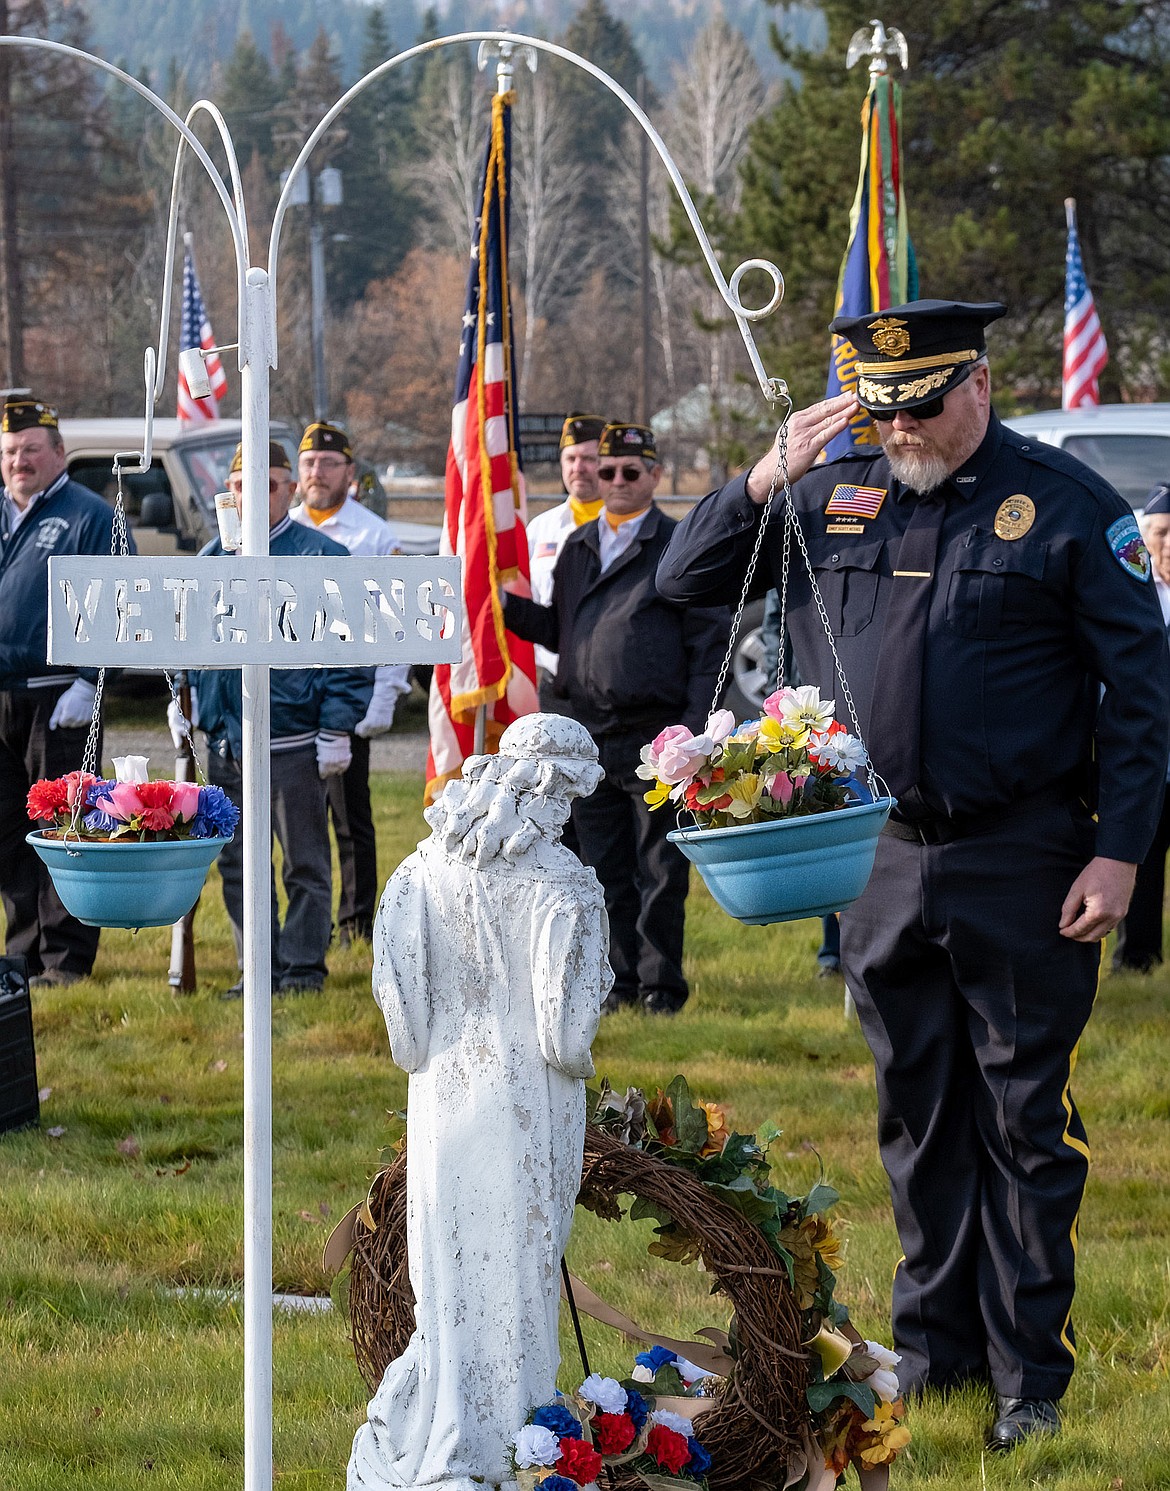 Libby Police Chief Scott Kessel salutes after placing a wreath at the Libby Cemetery Veterans Memorial on Sunday, Nov. 11, 2018. (John Blodgett/The Western News)